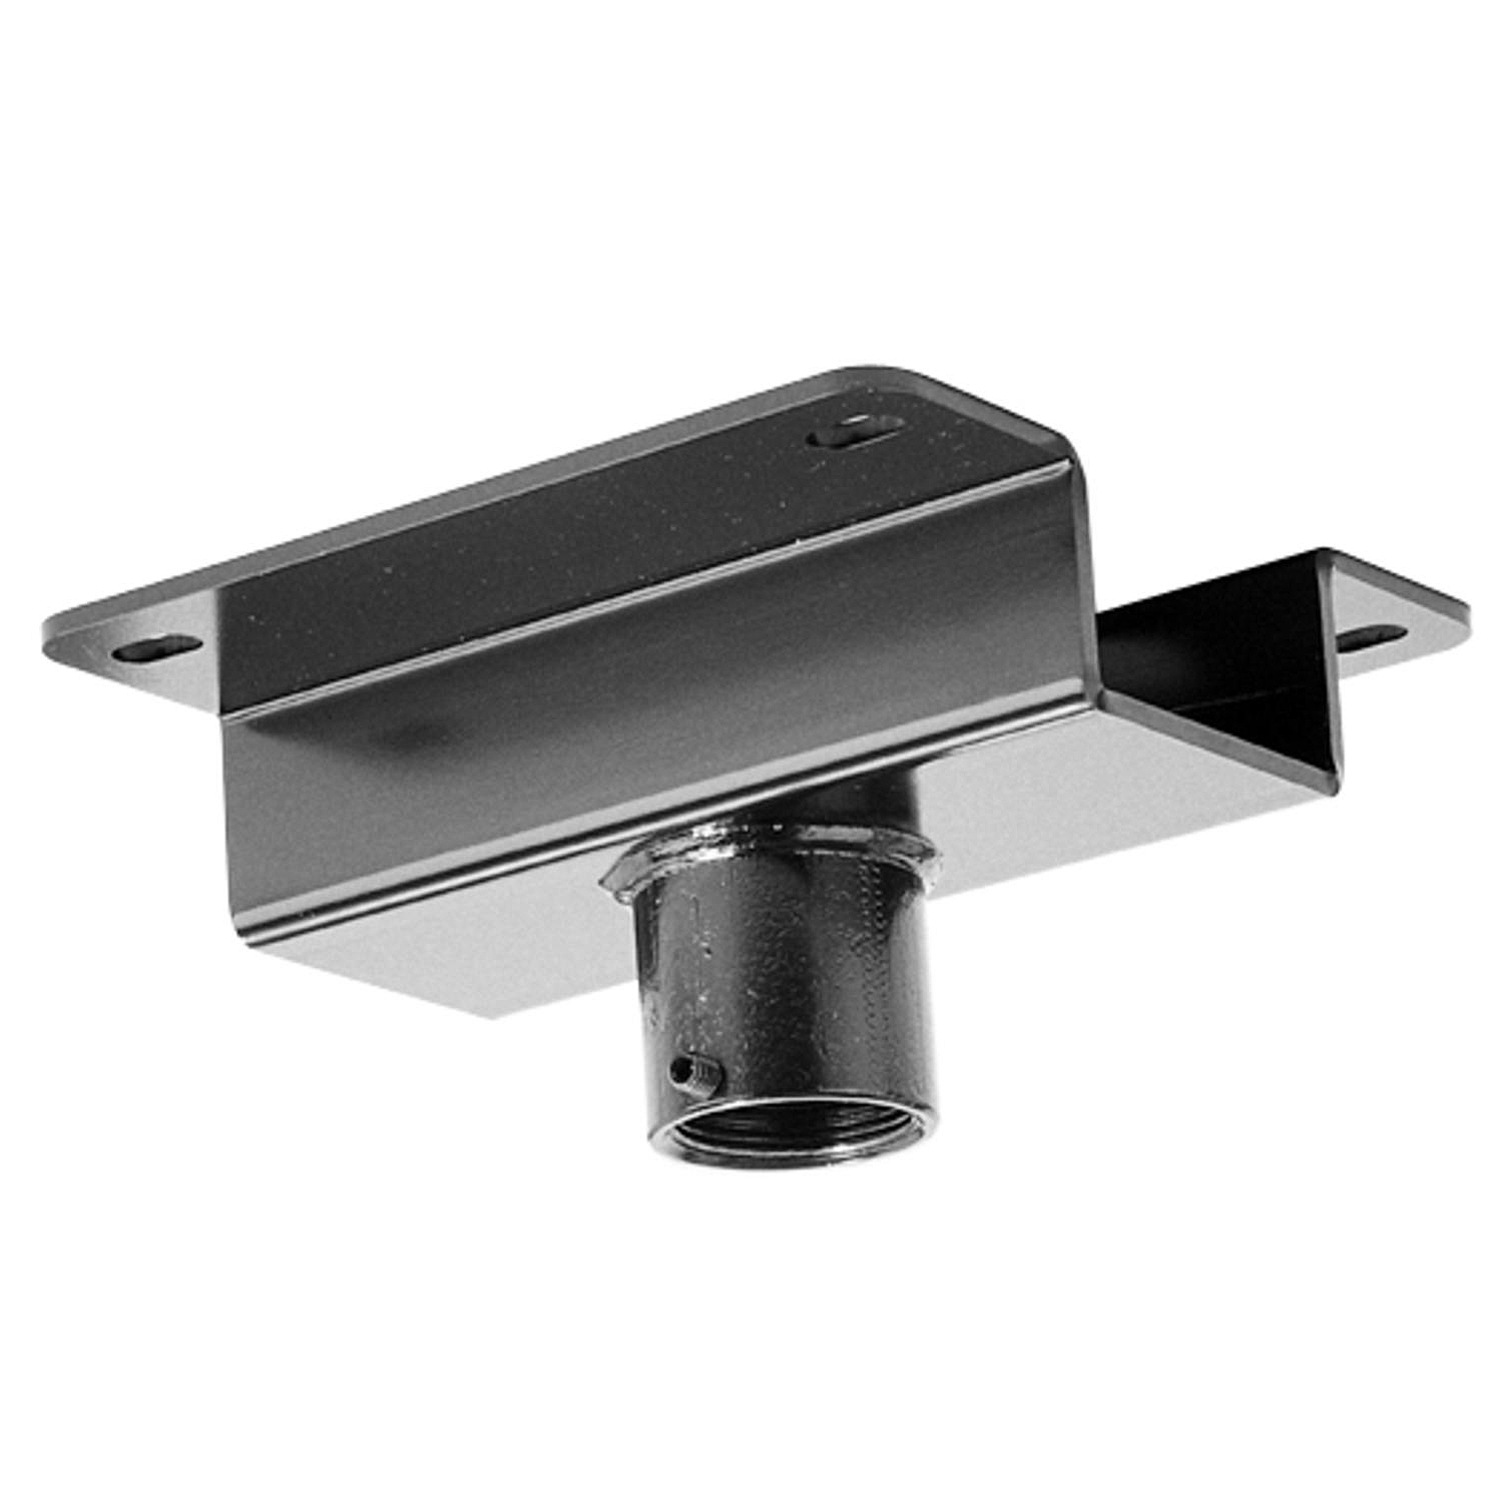 Ceiling mounting plate CMA330, black